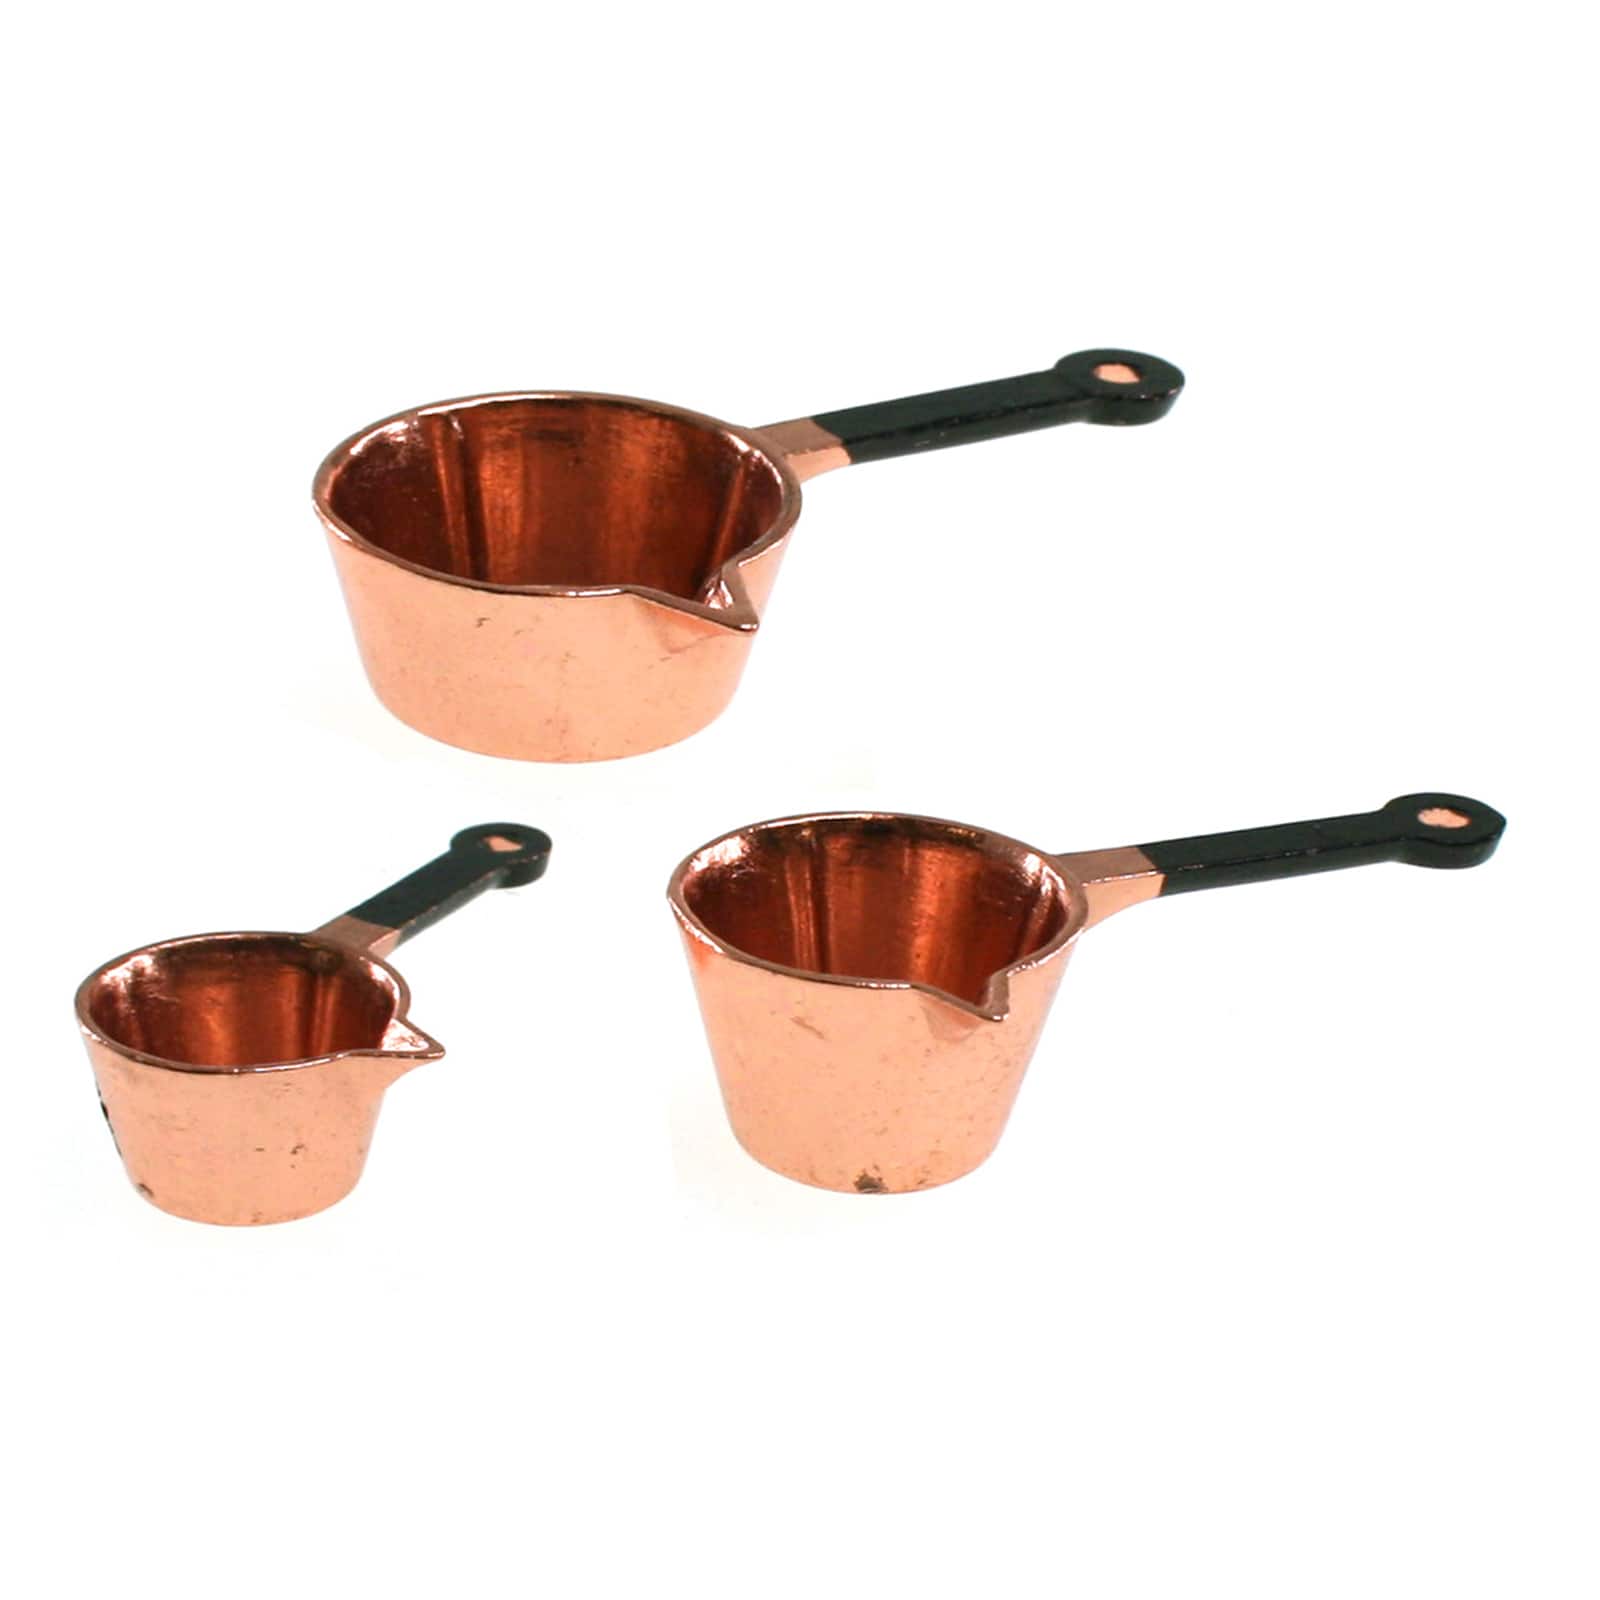 NEW MINIATURE SET OF 2 COPPER COOKING POT TIMELESS MINIS FOR DOLLHOUSE OR CRAFT 